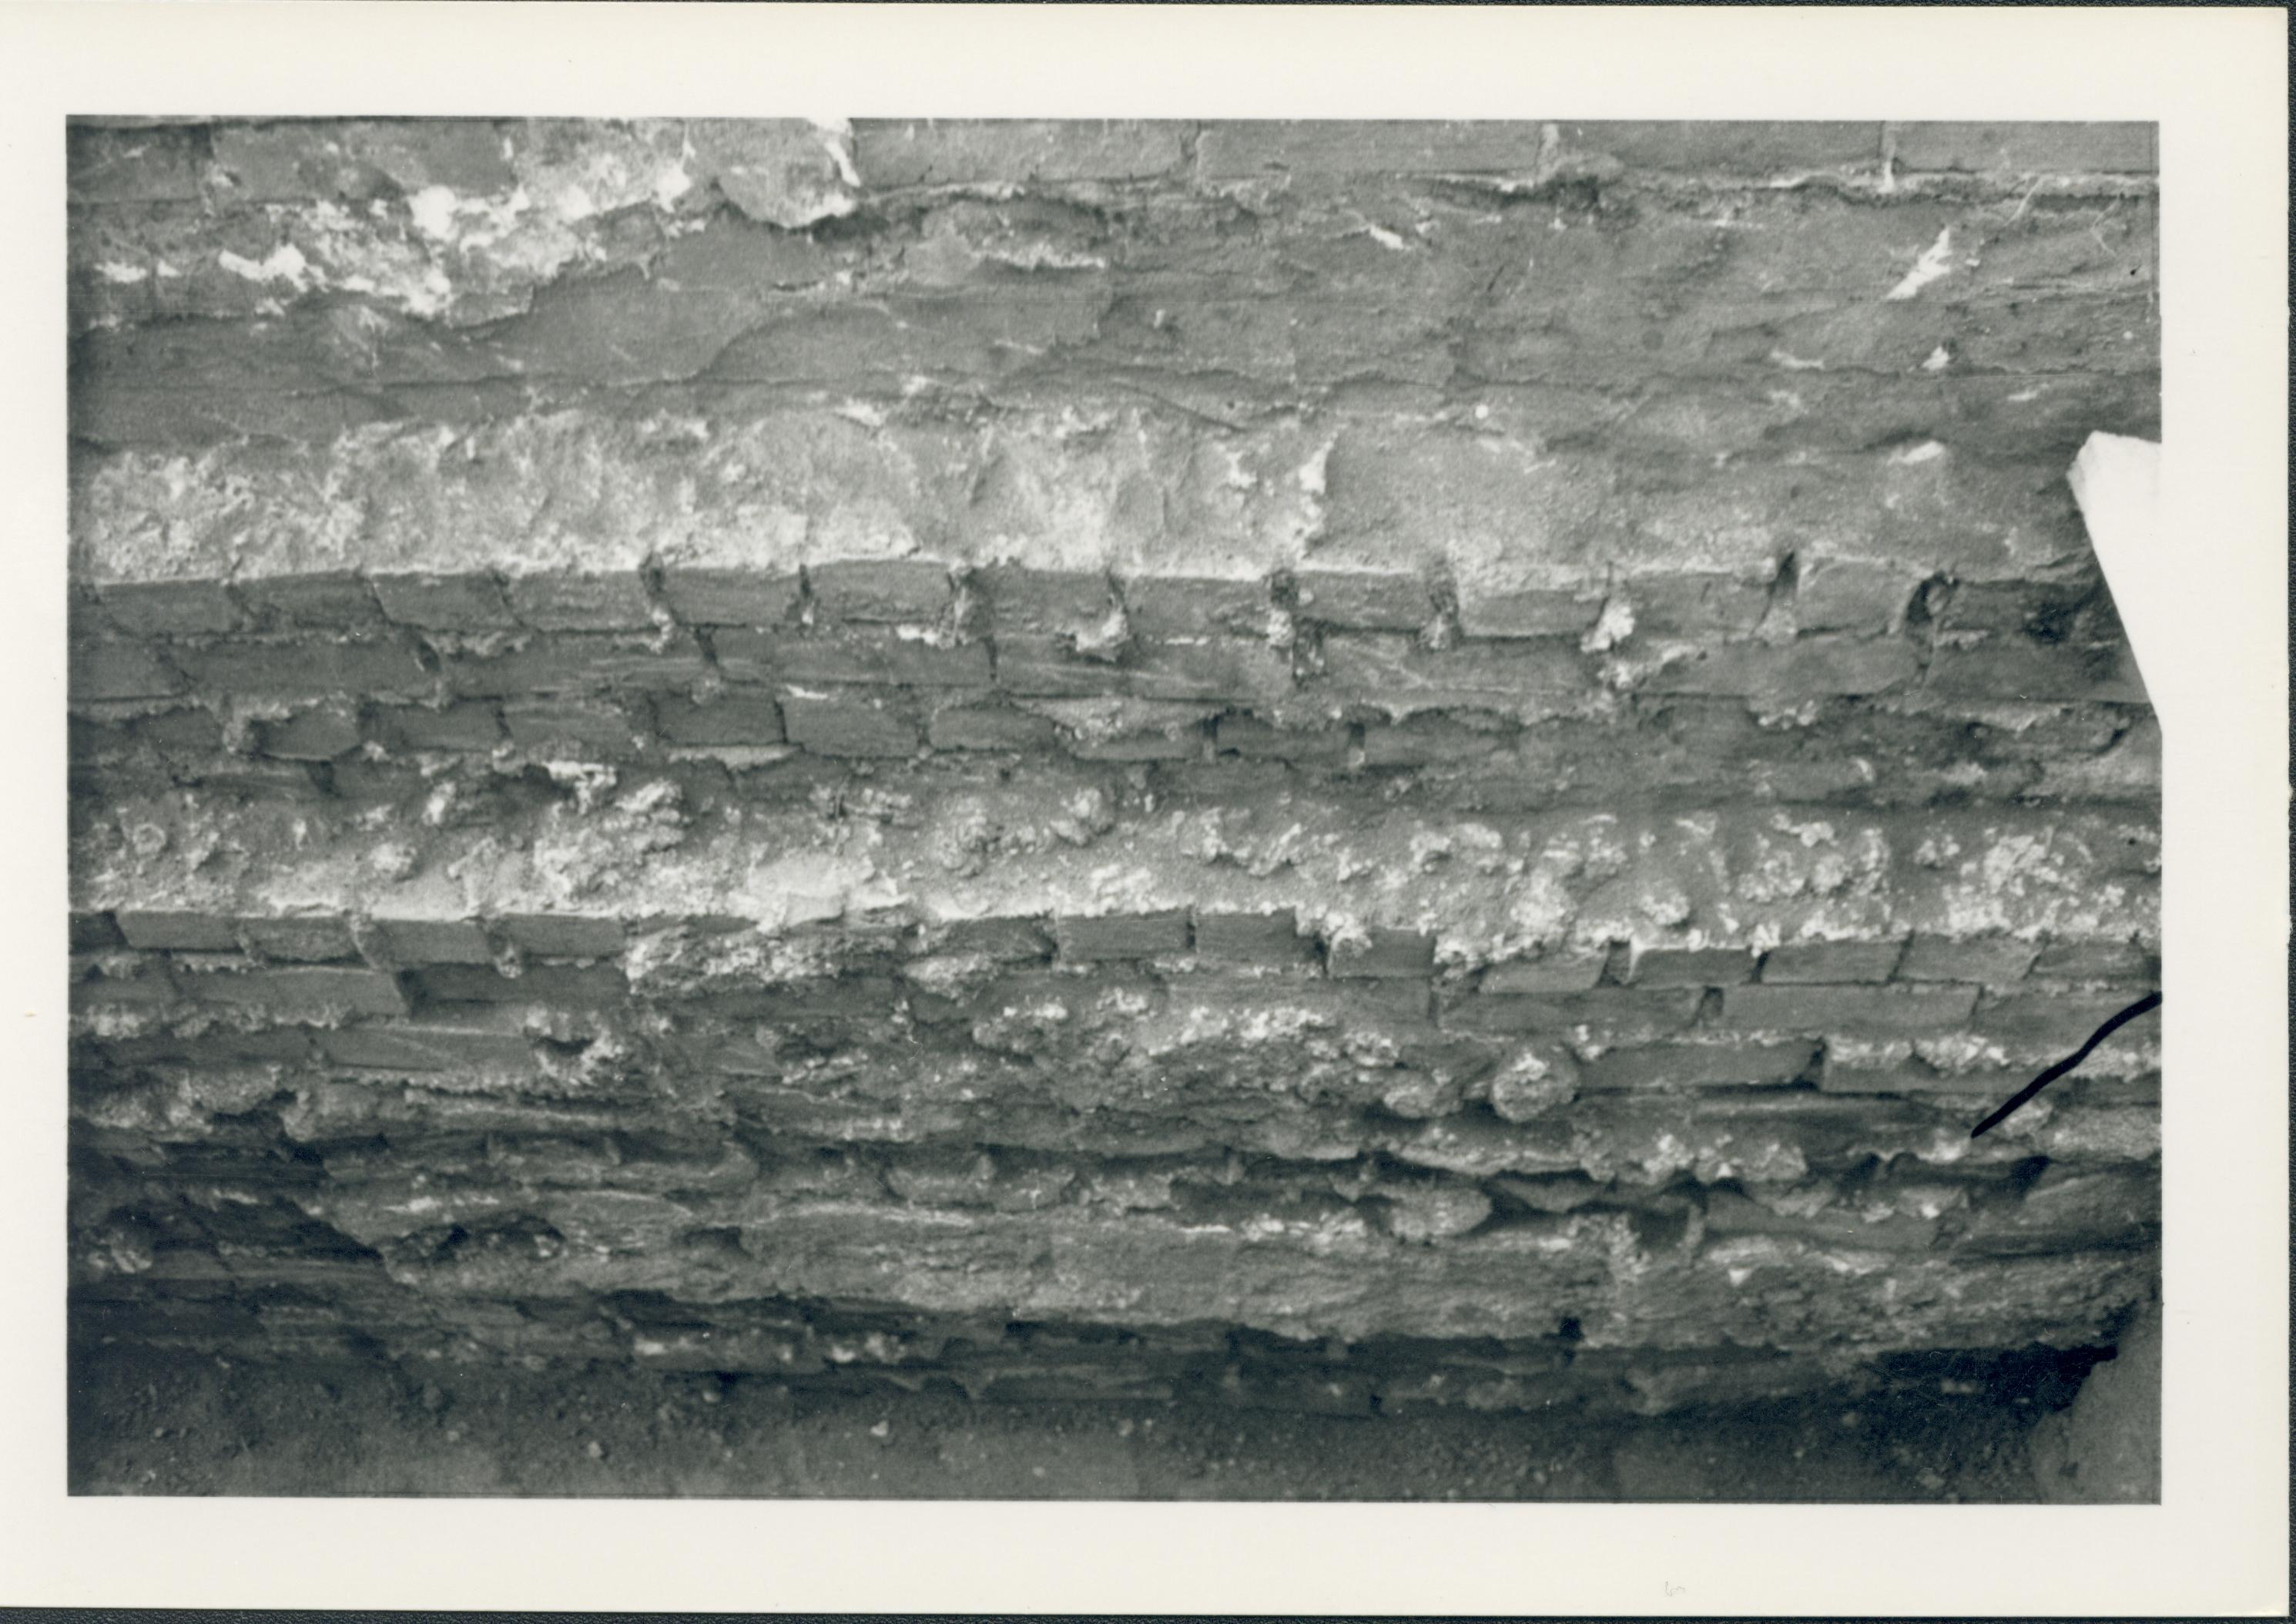 A section of retaining wall exposed during the Lincoln Home restoration of 1987-1988.